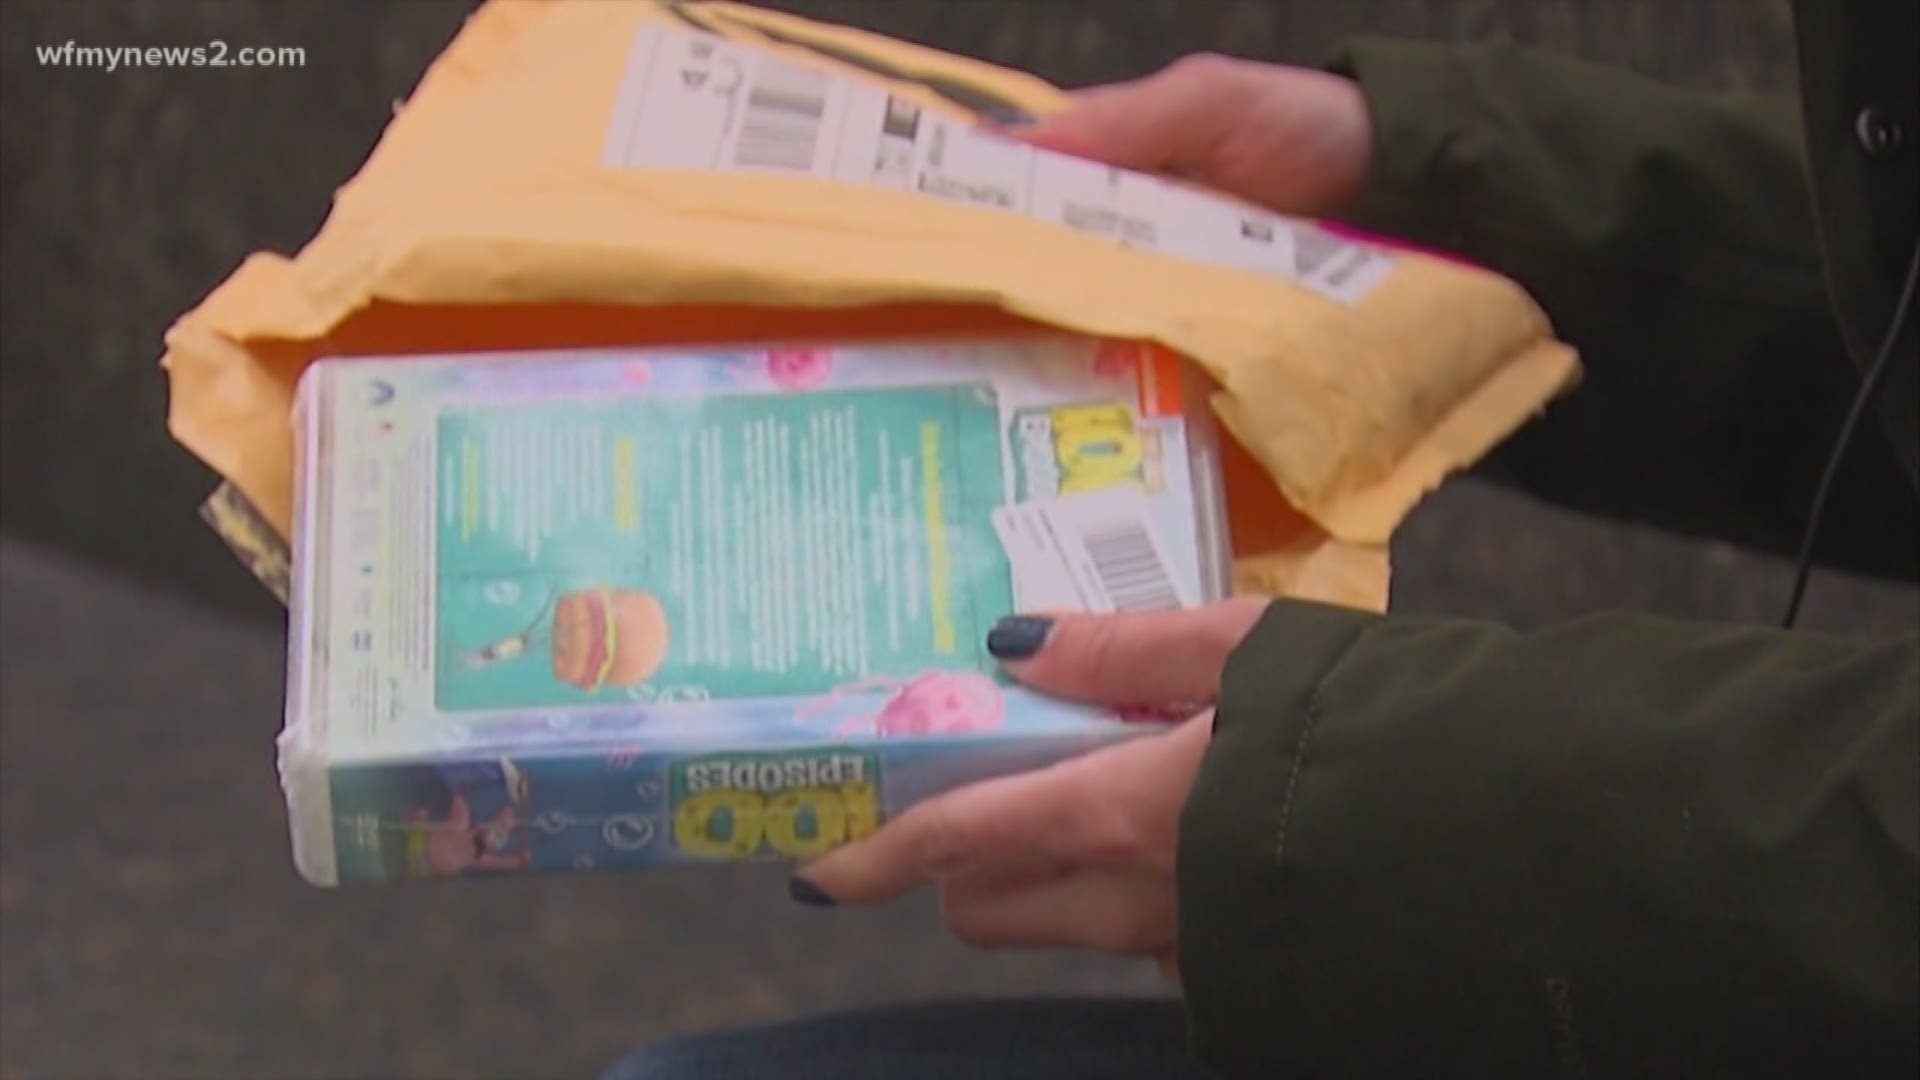 There is a rise in delivery drivers carelessly treating gifts. Amazon responds.